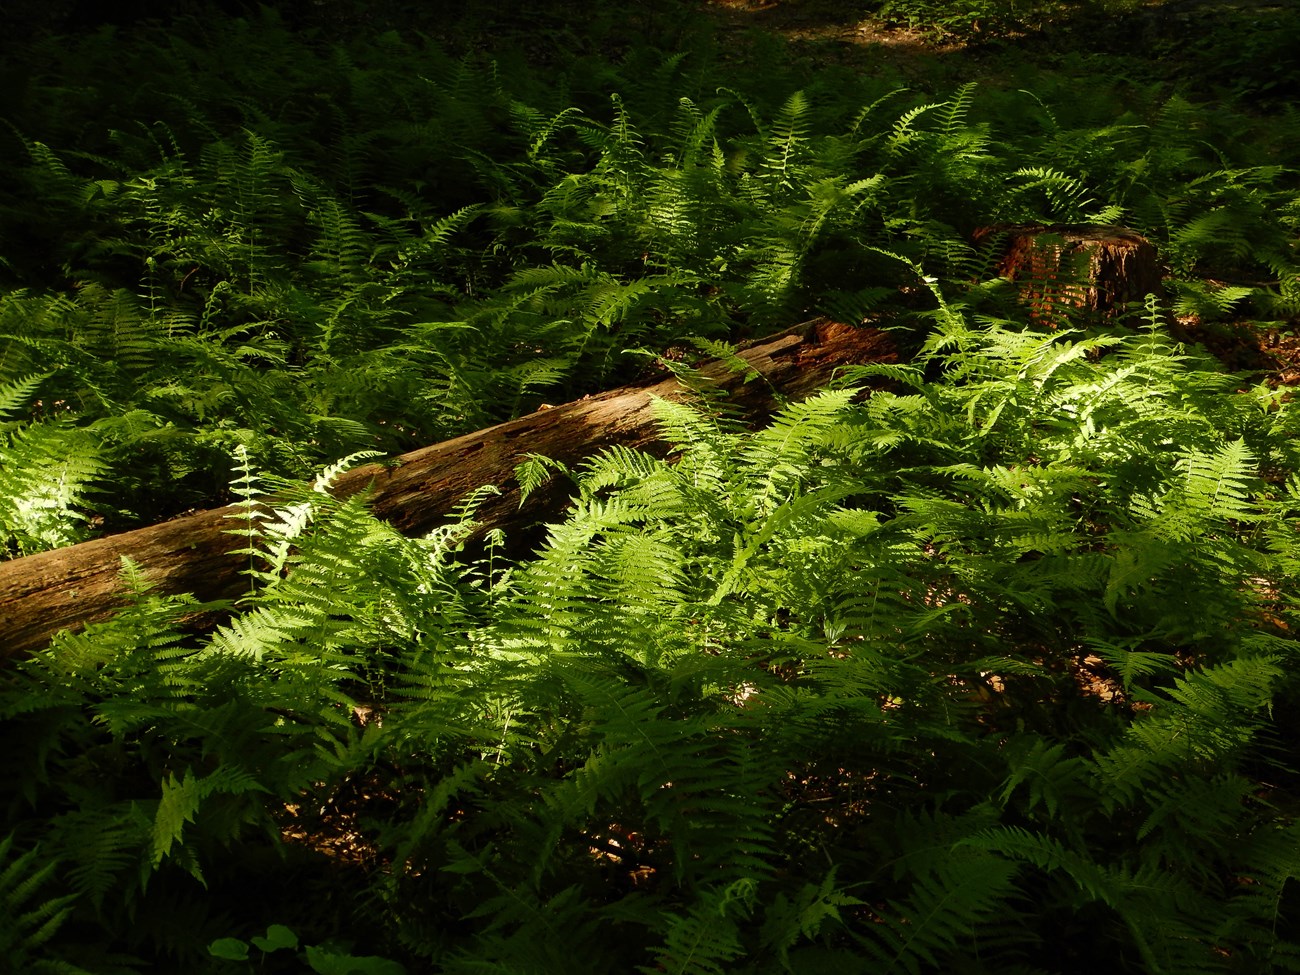 Multiple ferns covering forest floor and surrounding decayed log